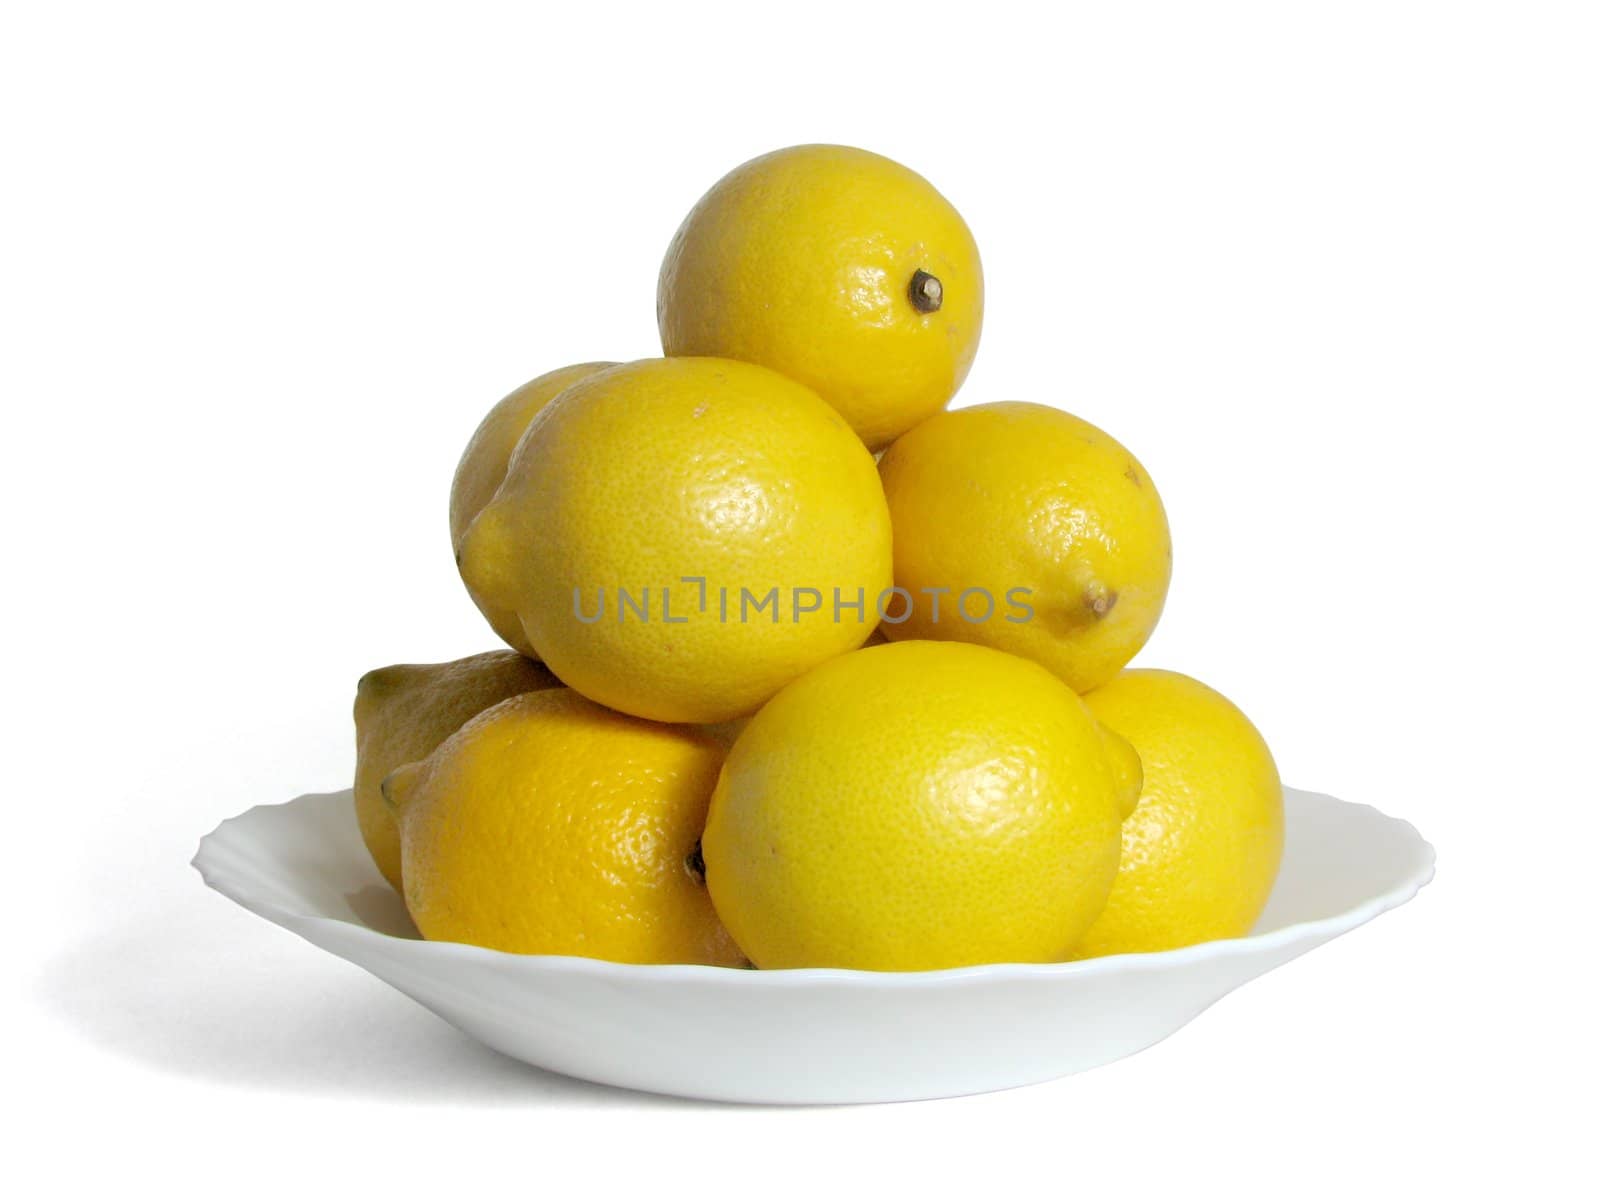 Hill of lemons on a white plate by Svetovid